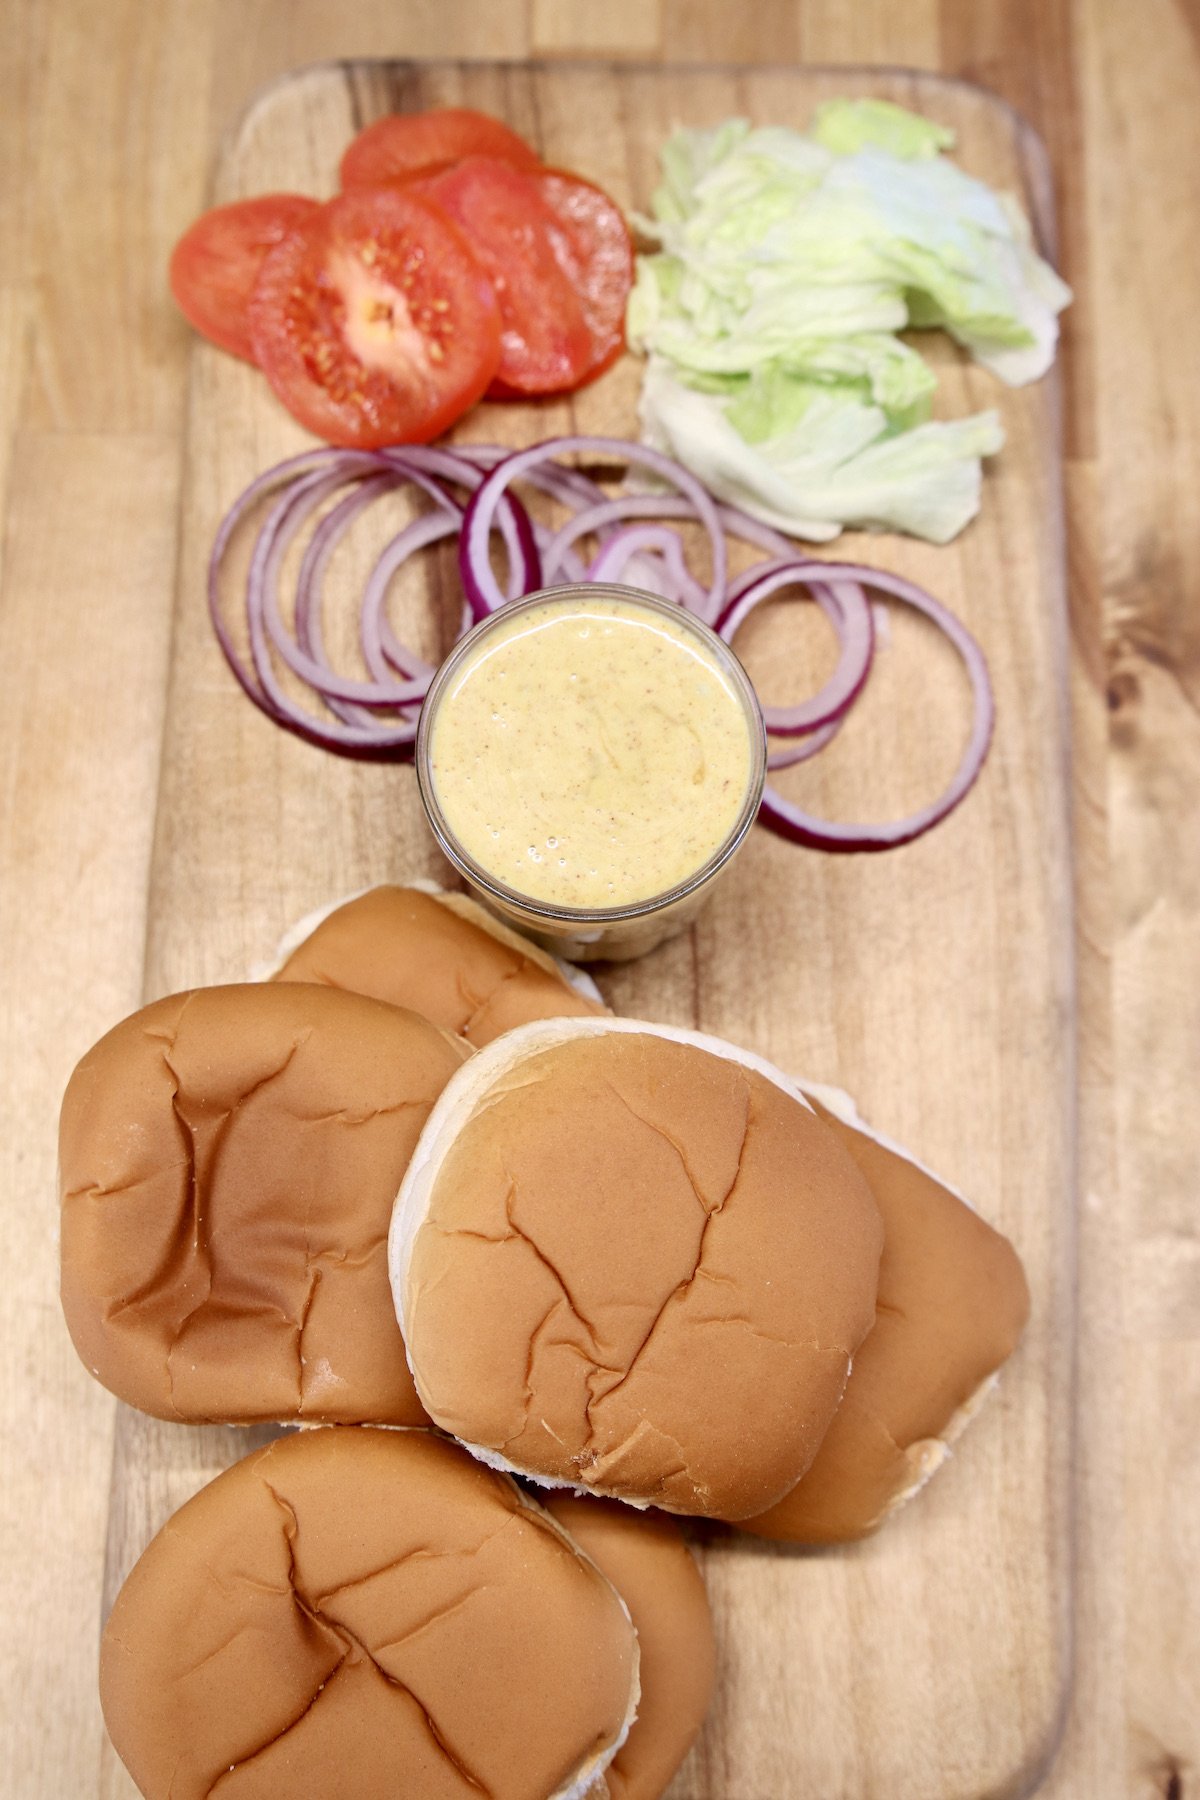 tomatoes, lettuce, red onion, mustard and buns